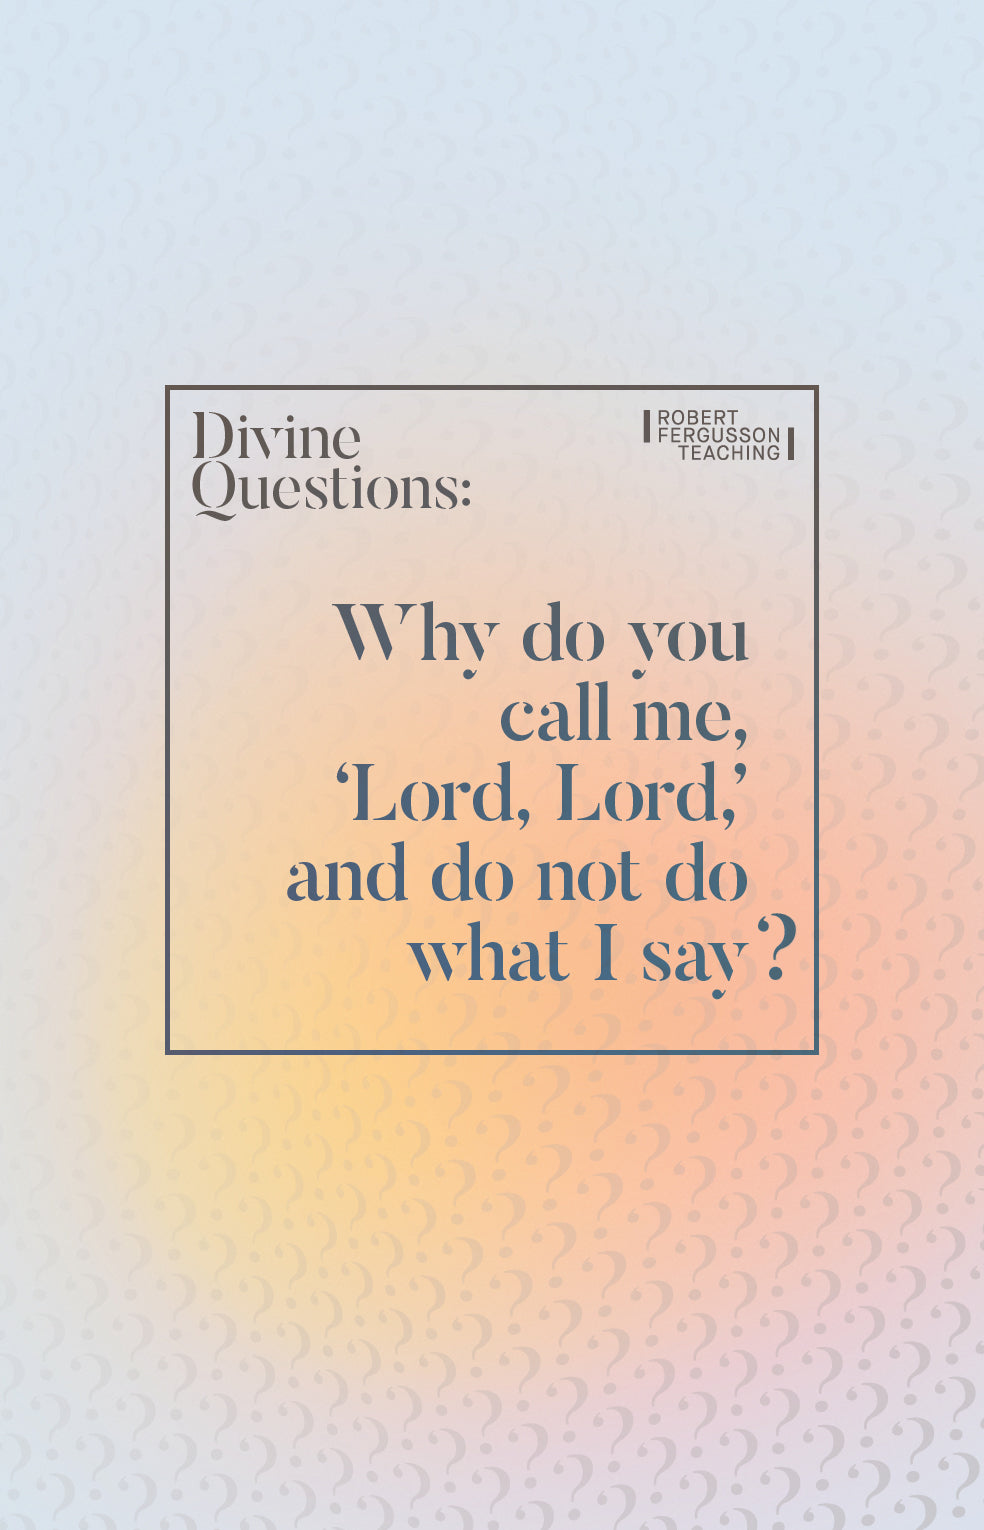 Why do you call me, ‘Lord, Lord,’ and do not do what I say?